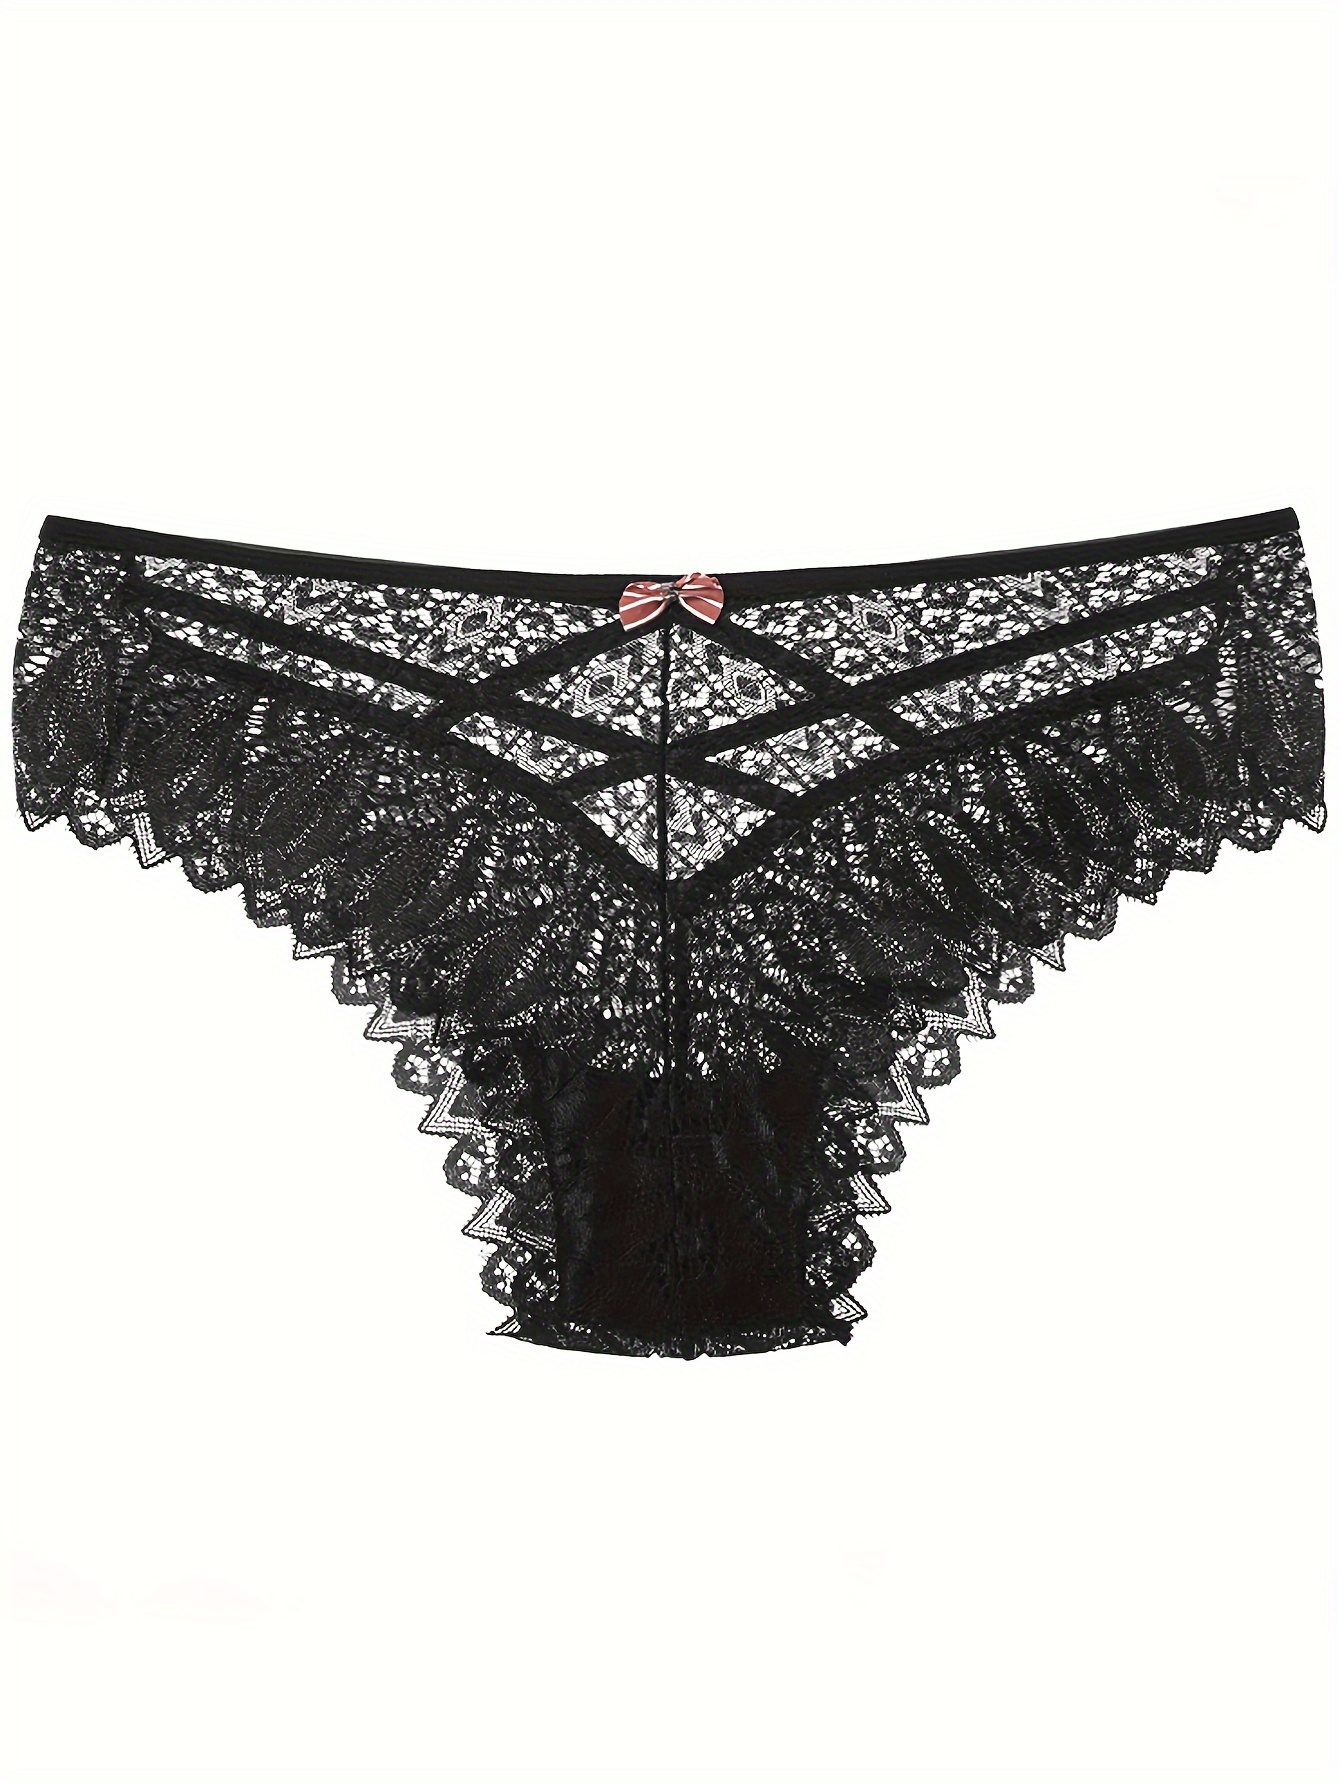 Womens Sexy Panties Lace Hollow Out Low Rise Thong Briefs Lingerie  Underwear l